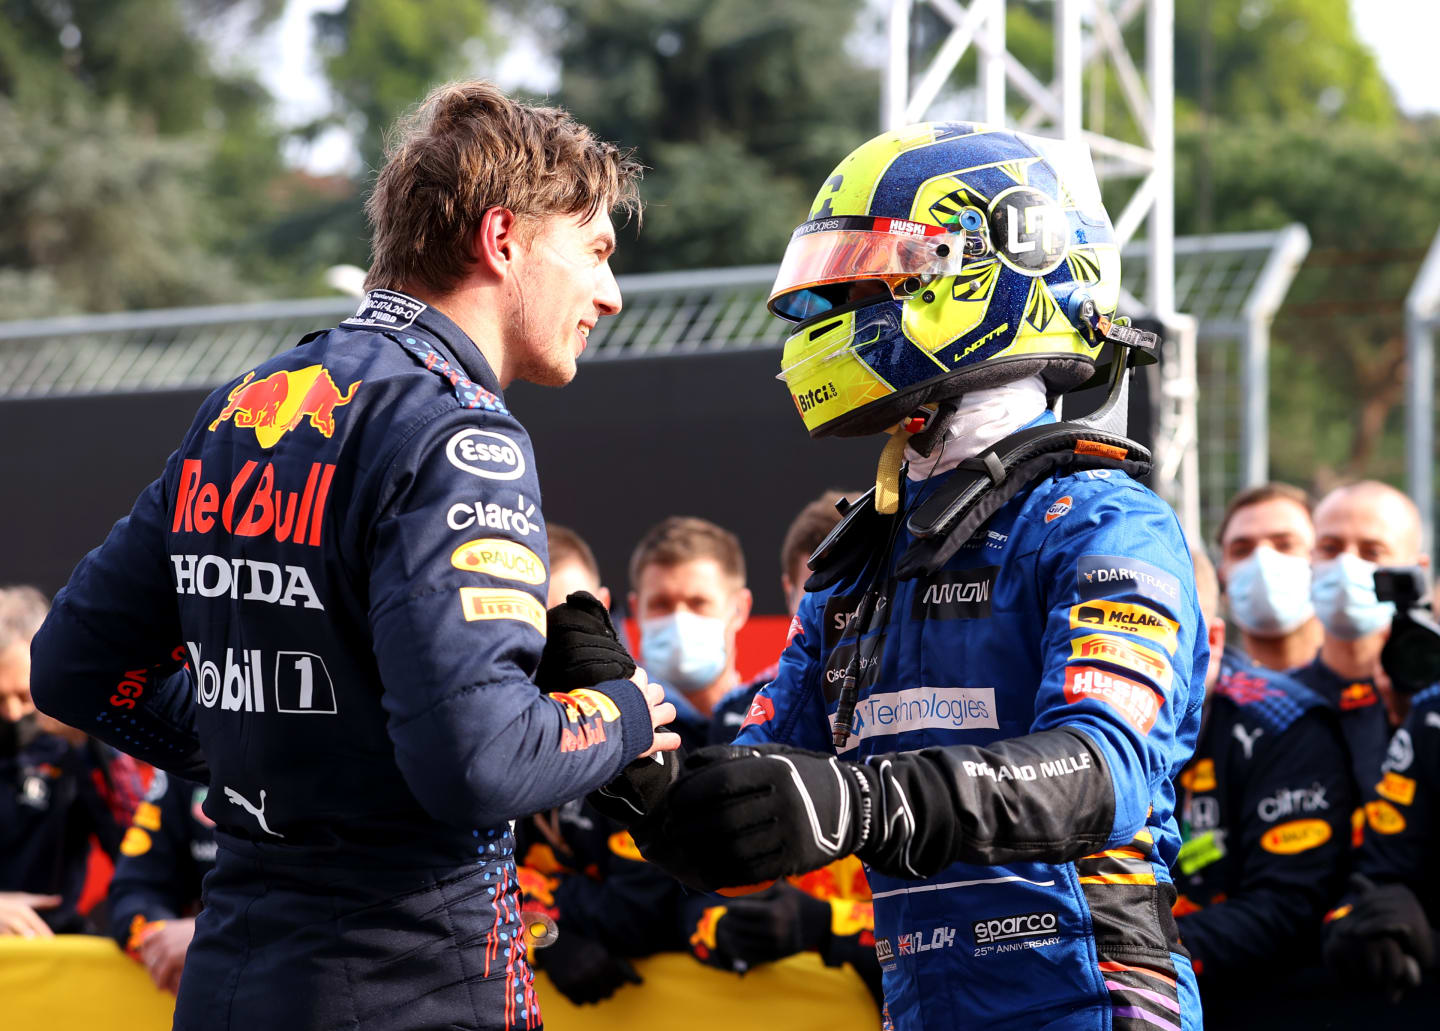 IMOLA, ITALY - APRIL 18: Race winner Max Verstappen of Netherlands and Red Bull Racing and third placed Lando Norris of Great Britain and McLaren F1 celebrate in parc ferme during the F1 Grand Prix of Emilia Romagna at Autodromo Enzo e Dino Ferrari on April 18, 2021 in Imola, Italy. (Photo by Bryn Lennon/Getty Images)